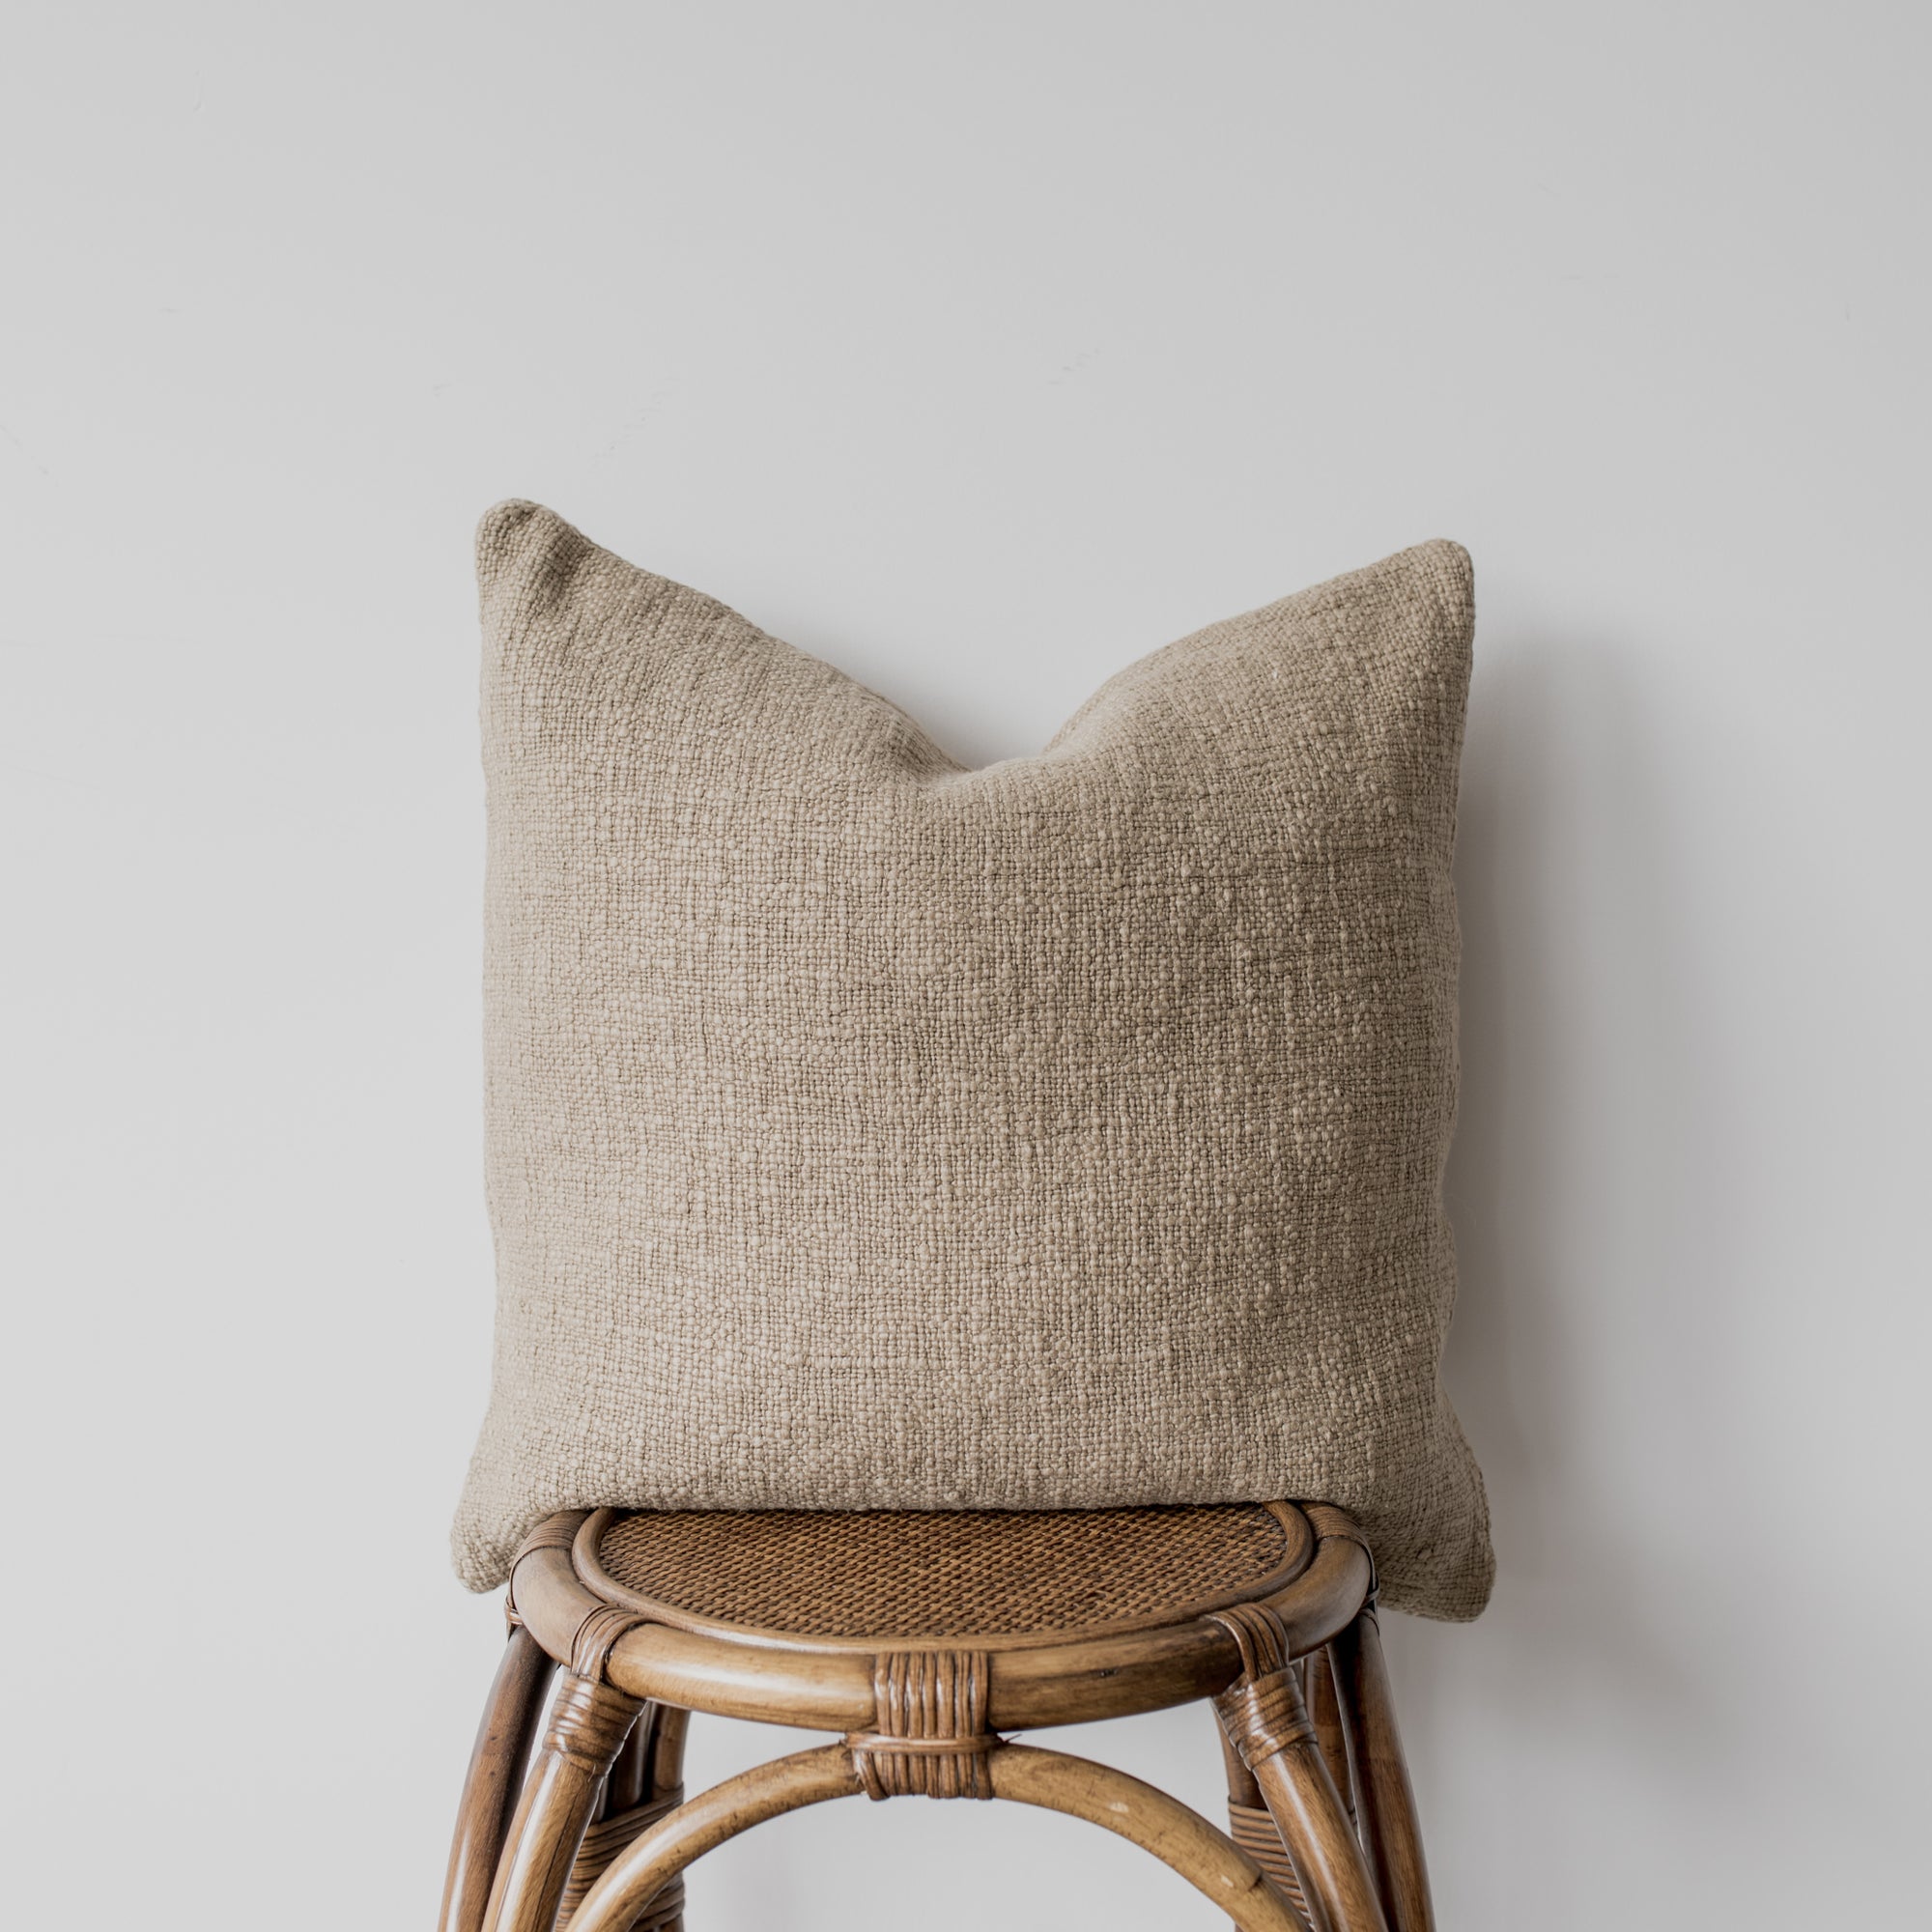 camel coloured linen cotton scatter cushion from corcovado furniture and homewares new zealand